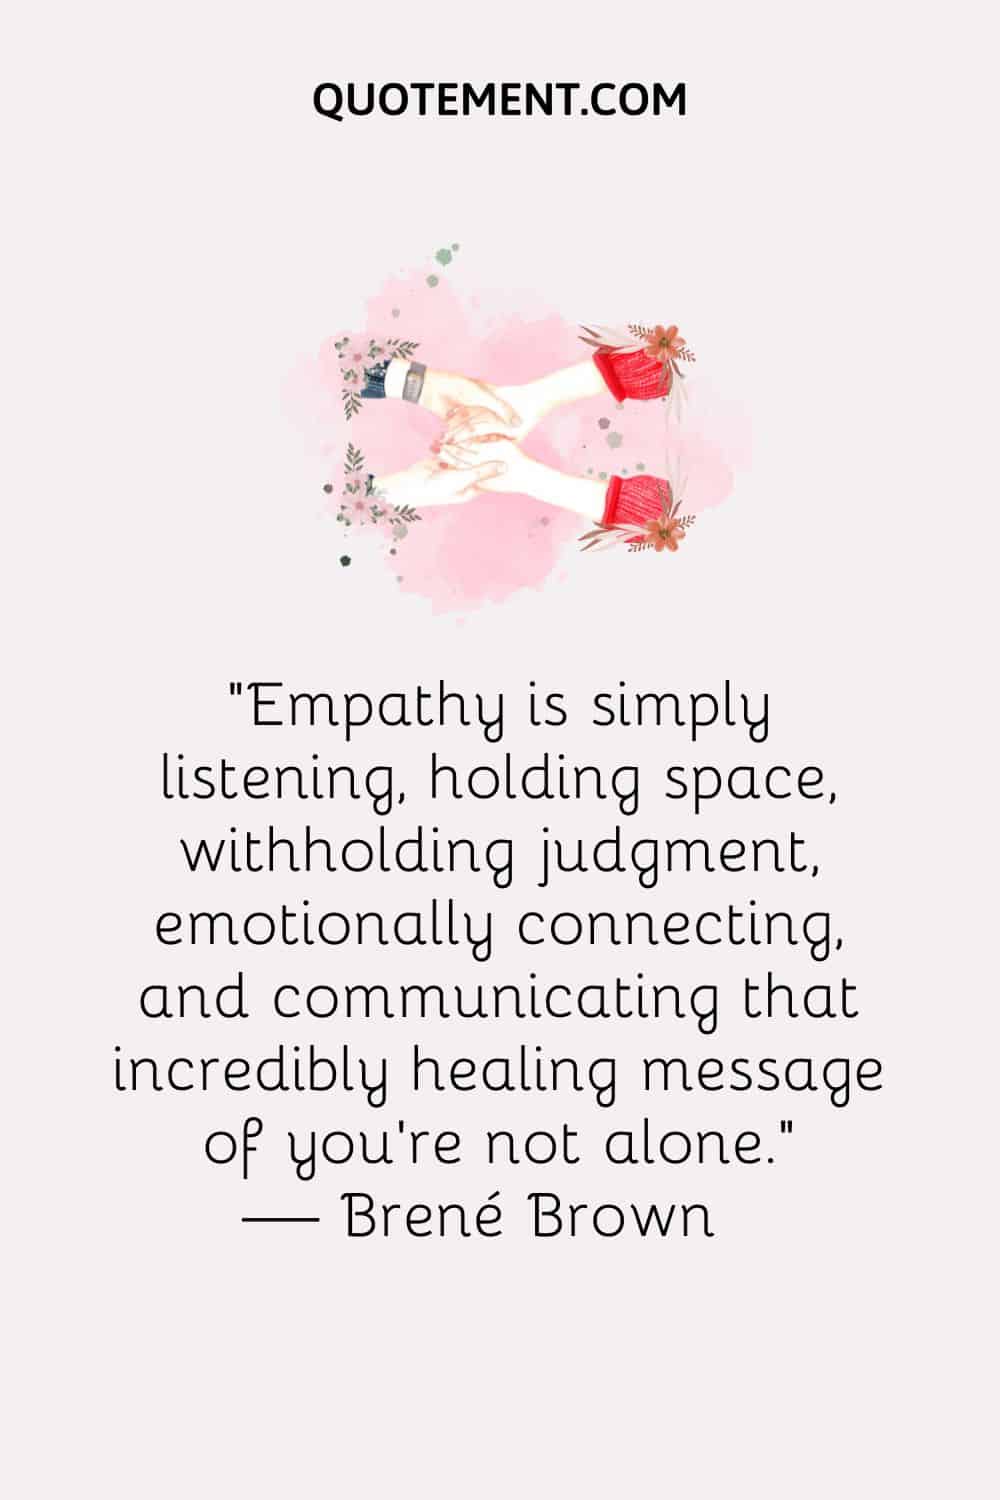 Empathy is simply listening, holding space, withholding judgment, emotionally connecting, and communicating that incredibly healing message of you’re not alone